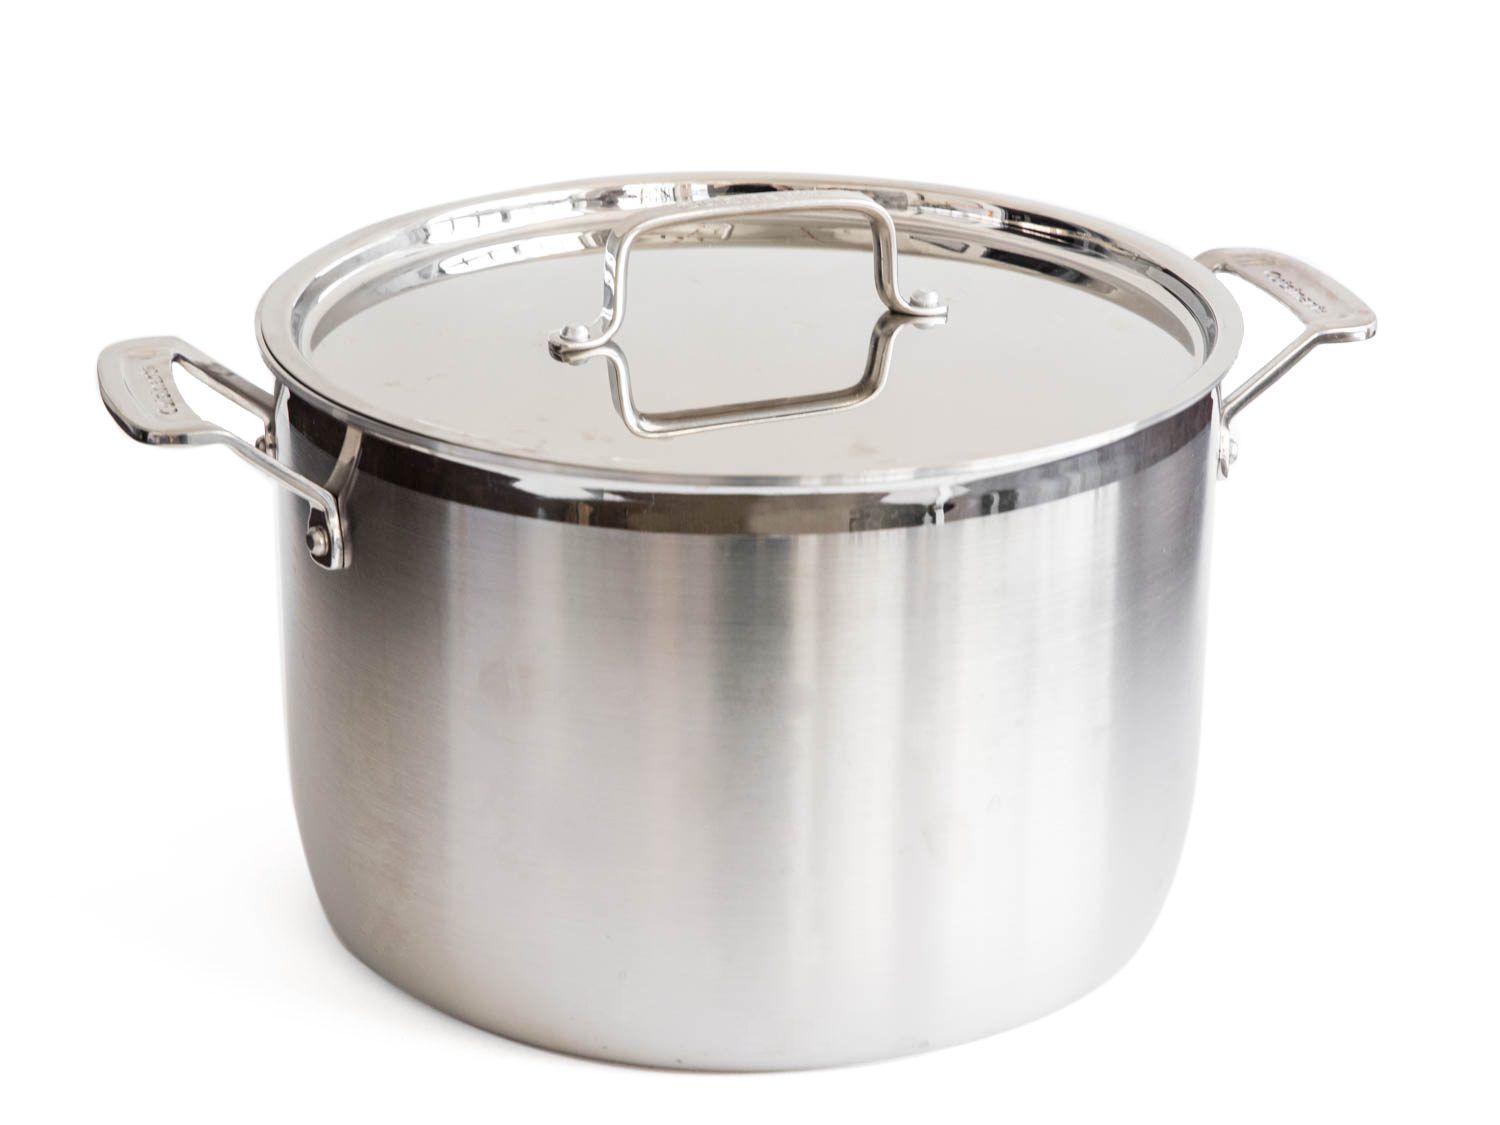 Stainless steel stockpot with lid